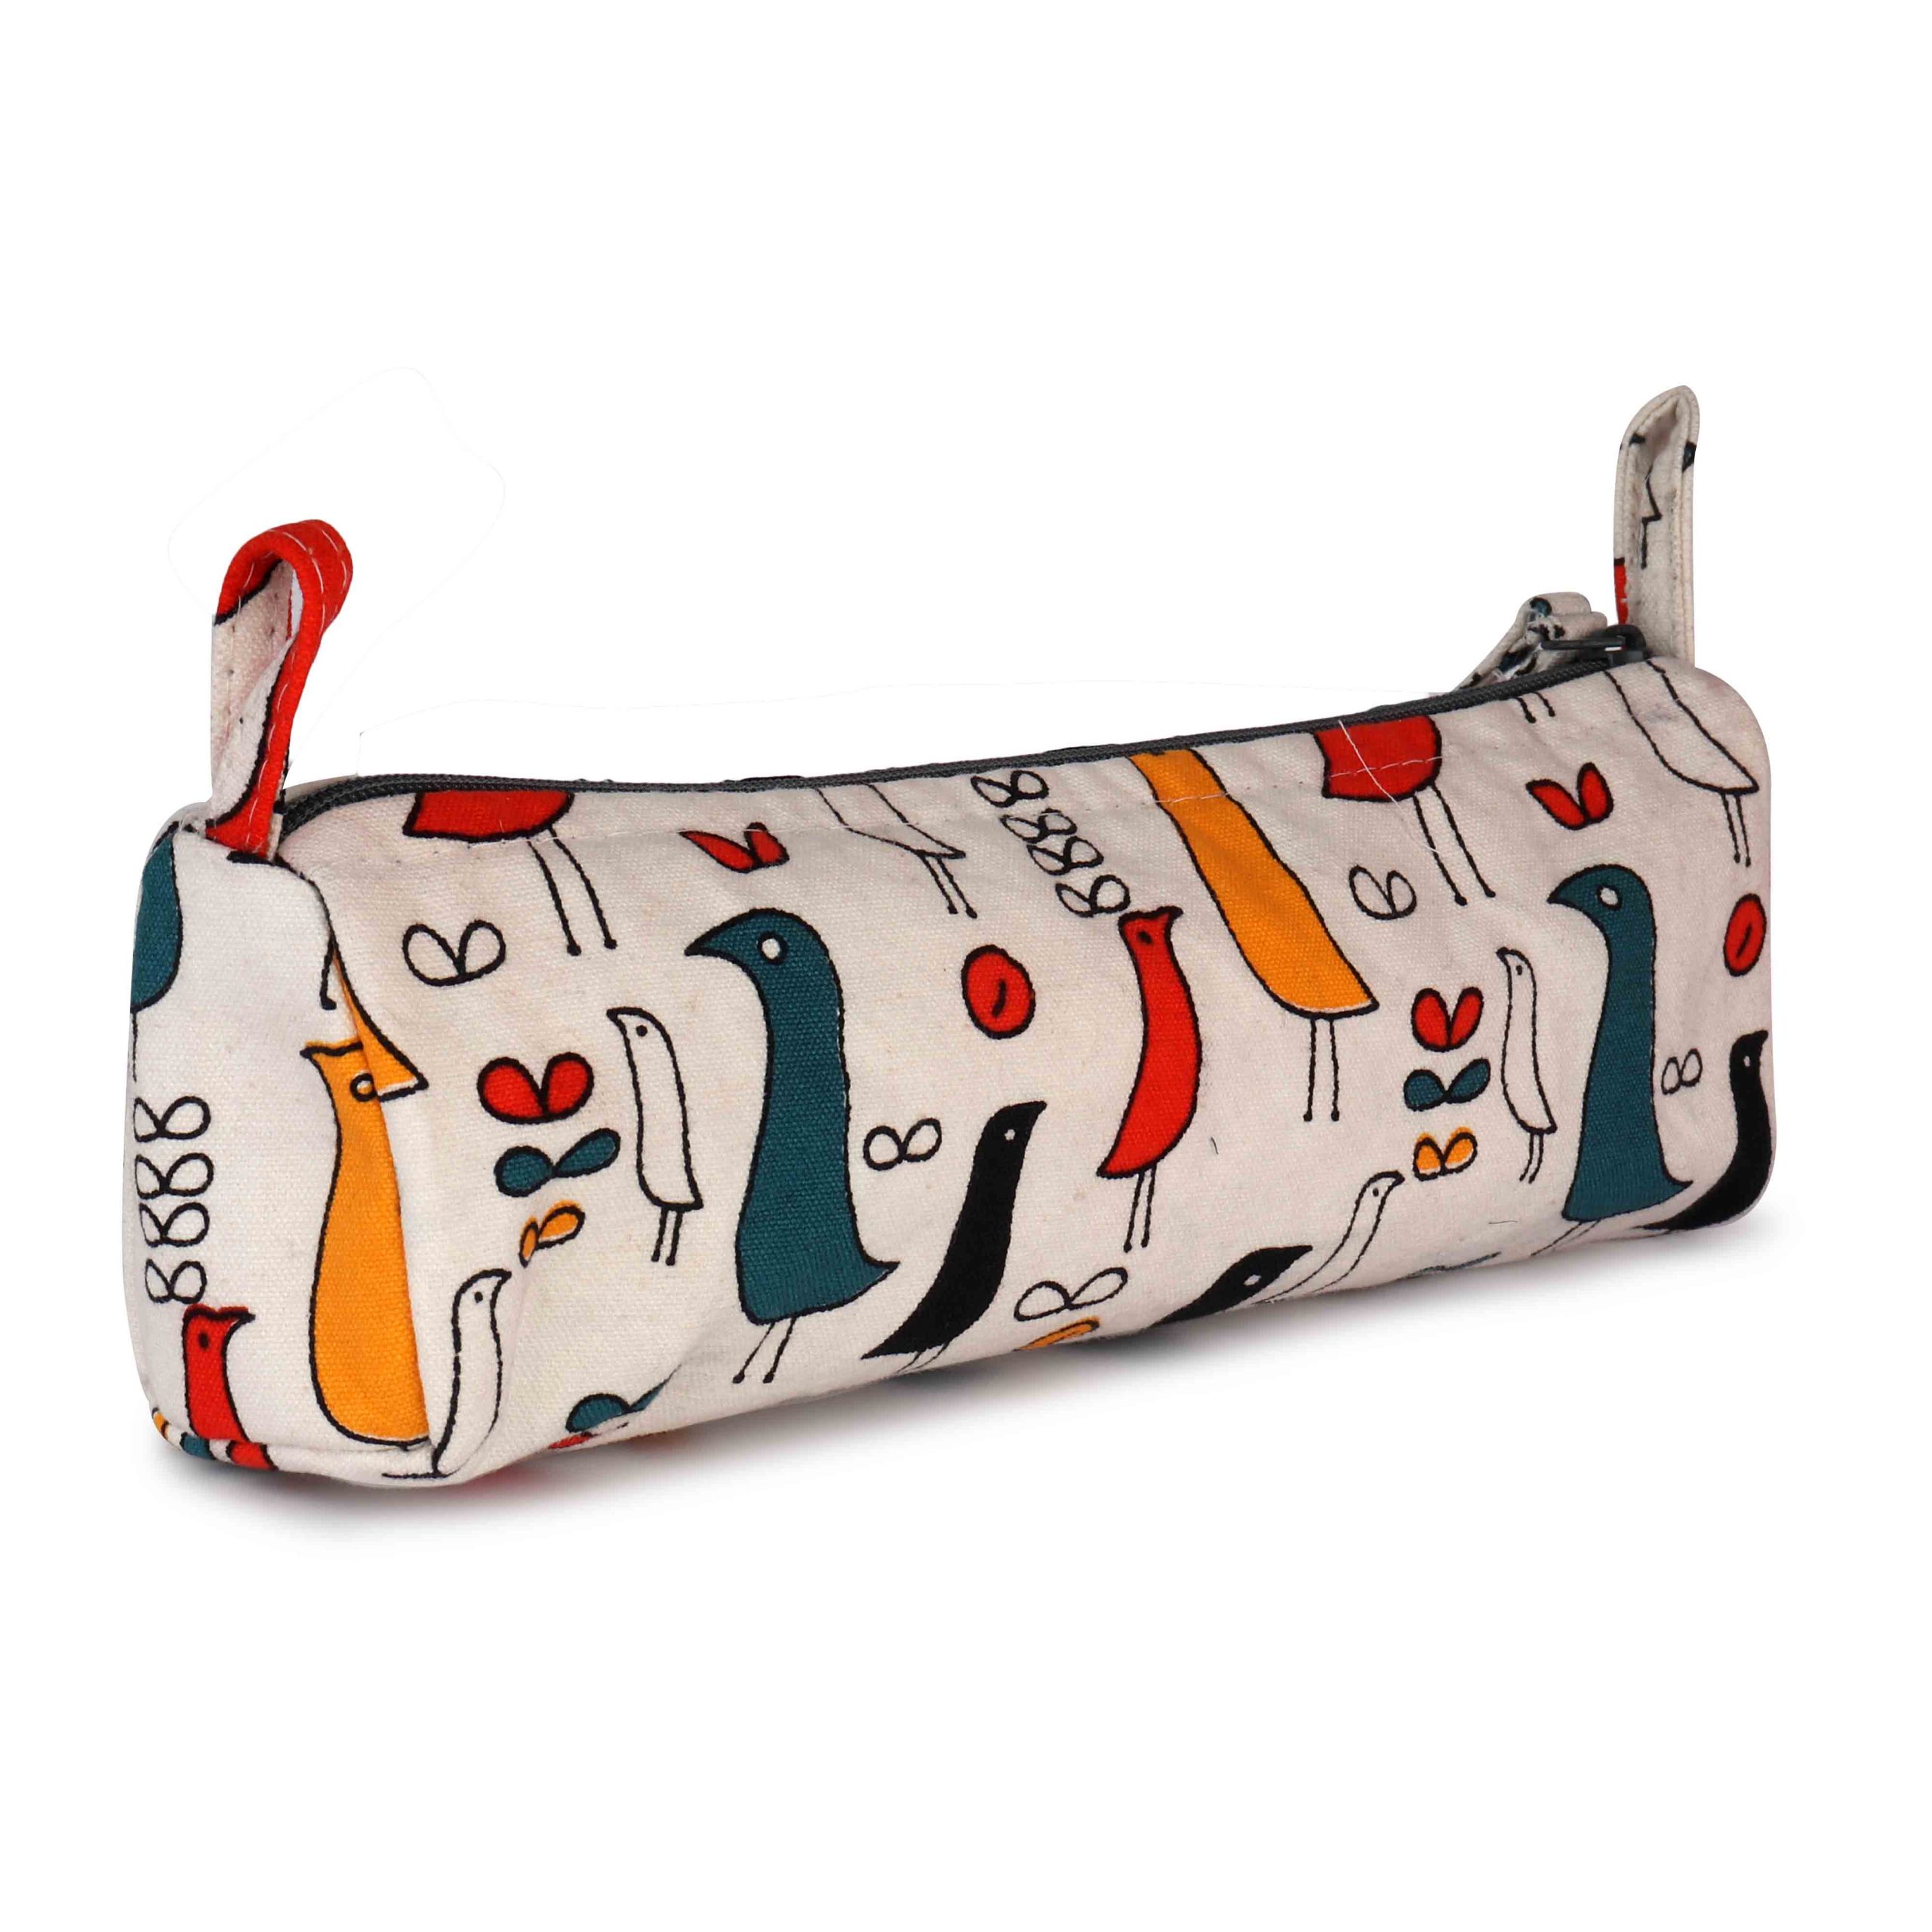 Personal Accessory Bag - Perky Birdie - The Stitch Company